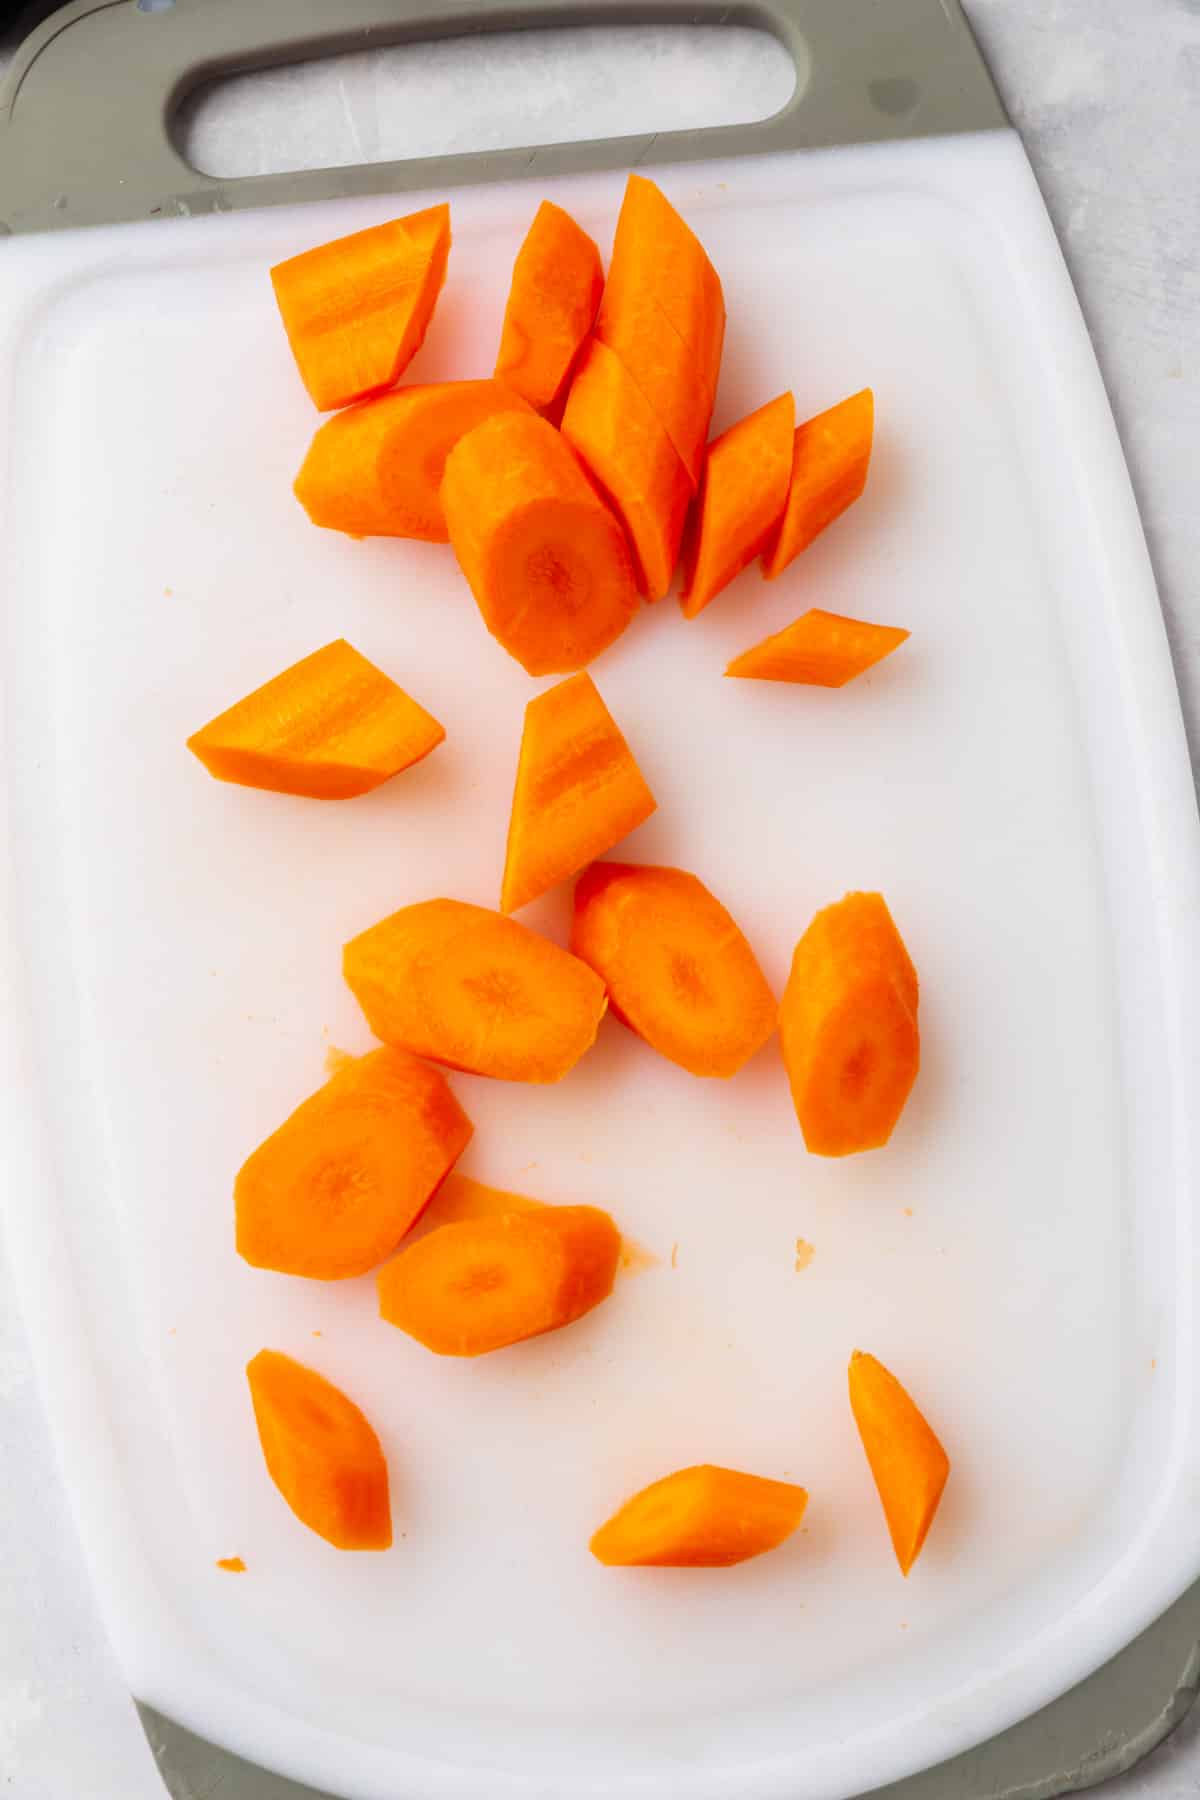 Carrots sliced on the bias on a white cutting board.